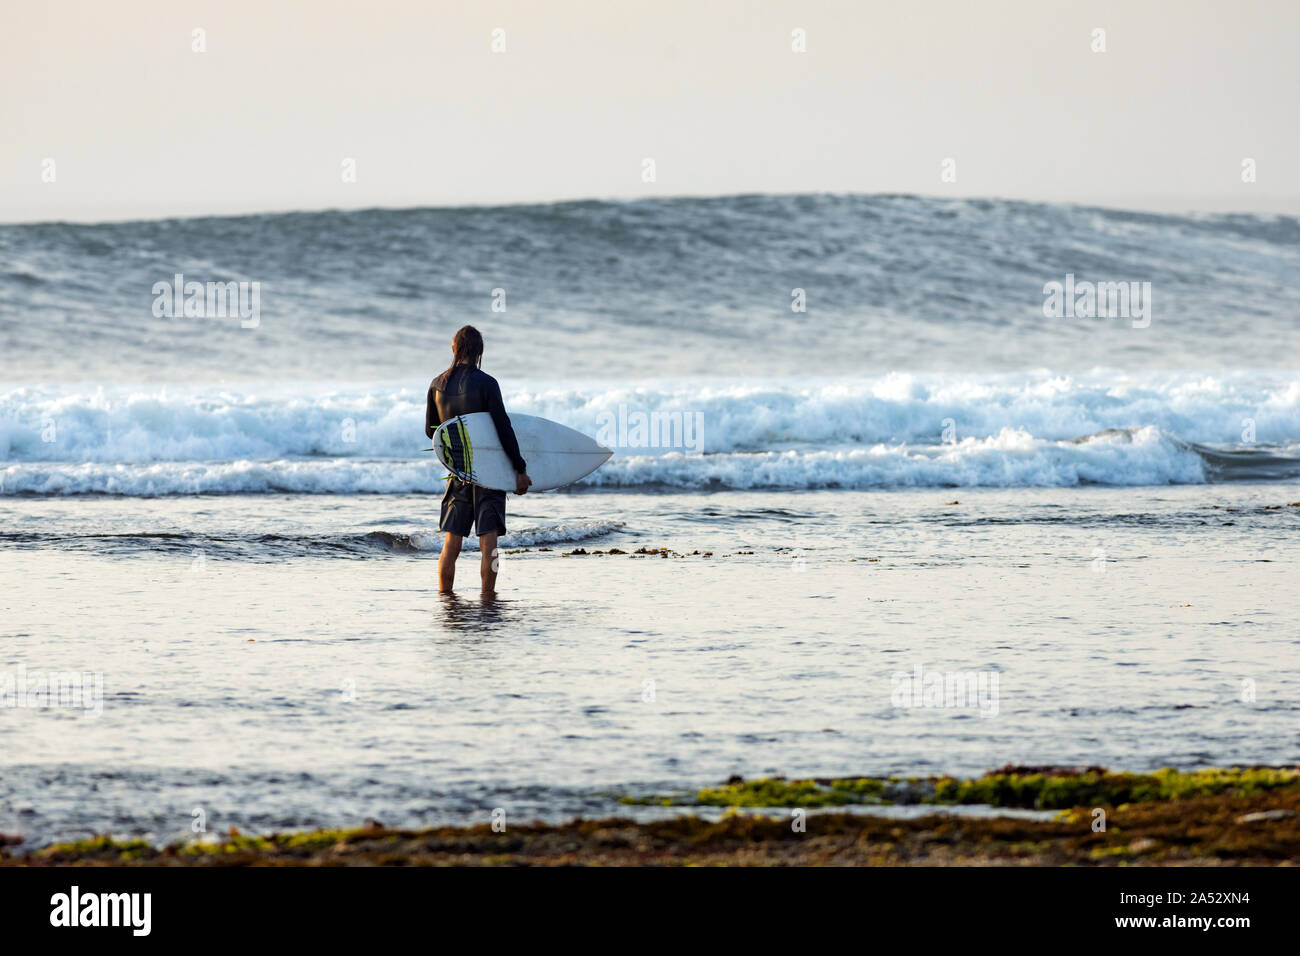 Surfer looking at wave Stock Photo